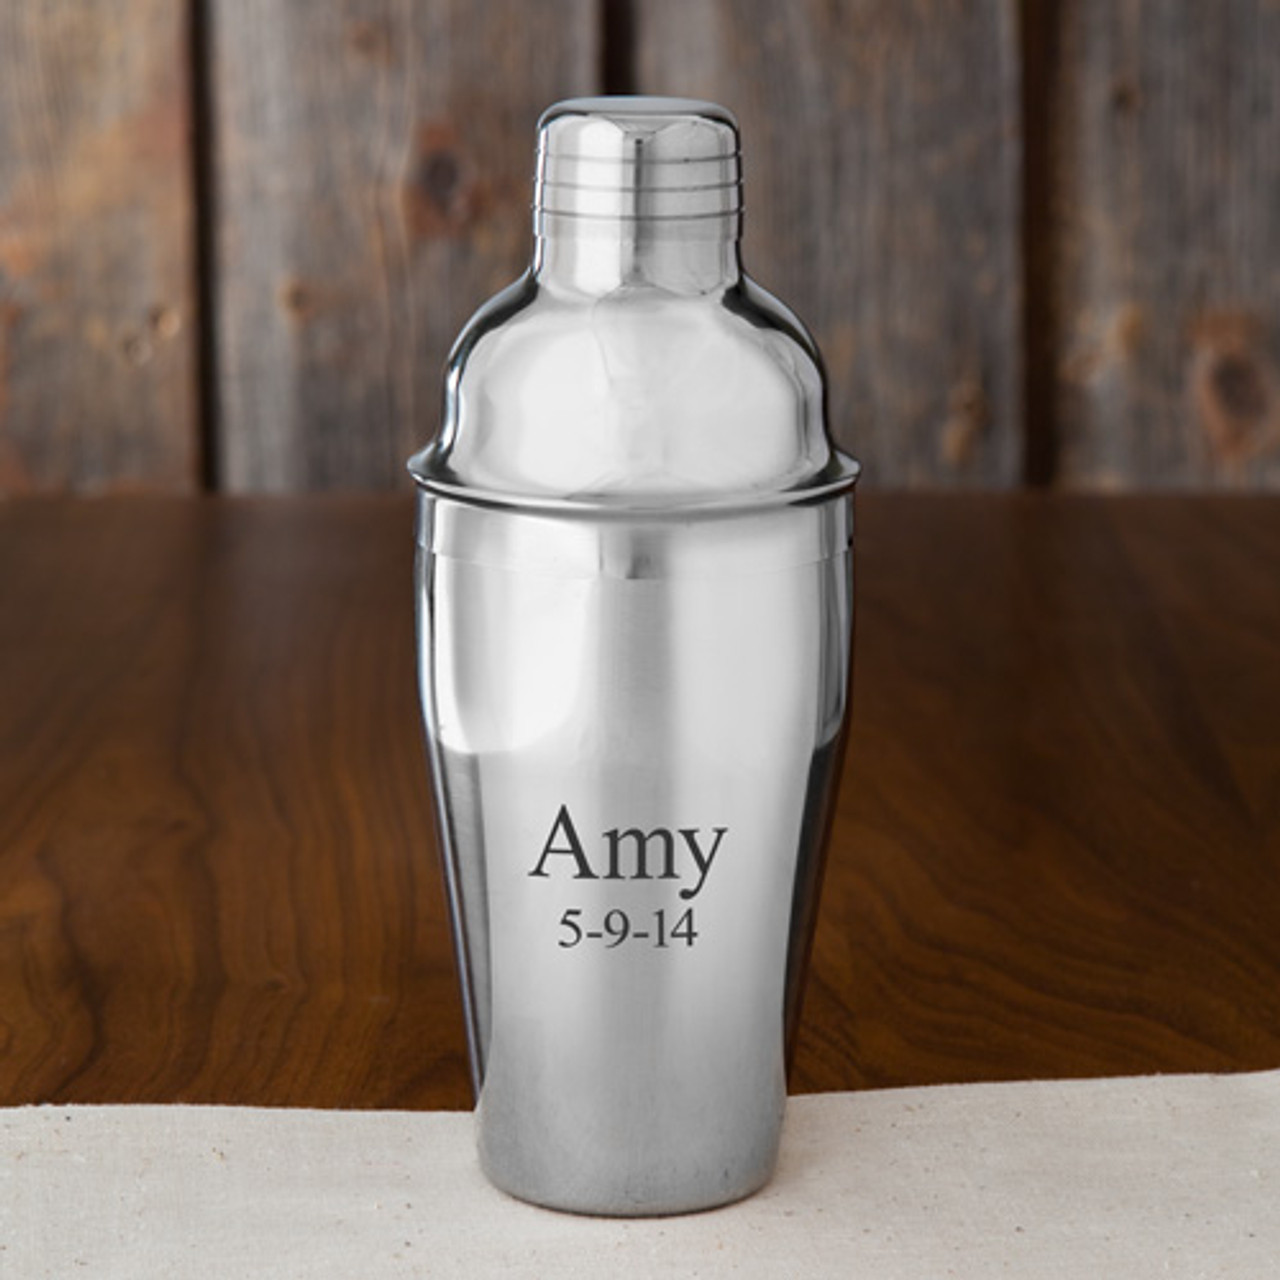 https://cdn11.bigcommerce.com/s-58yhy/images/stencil/1280x1280/products/195/463/personalized_cocktail_shaker_1__05172.1413064780.jpg?c=2